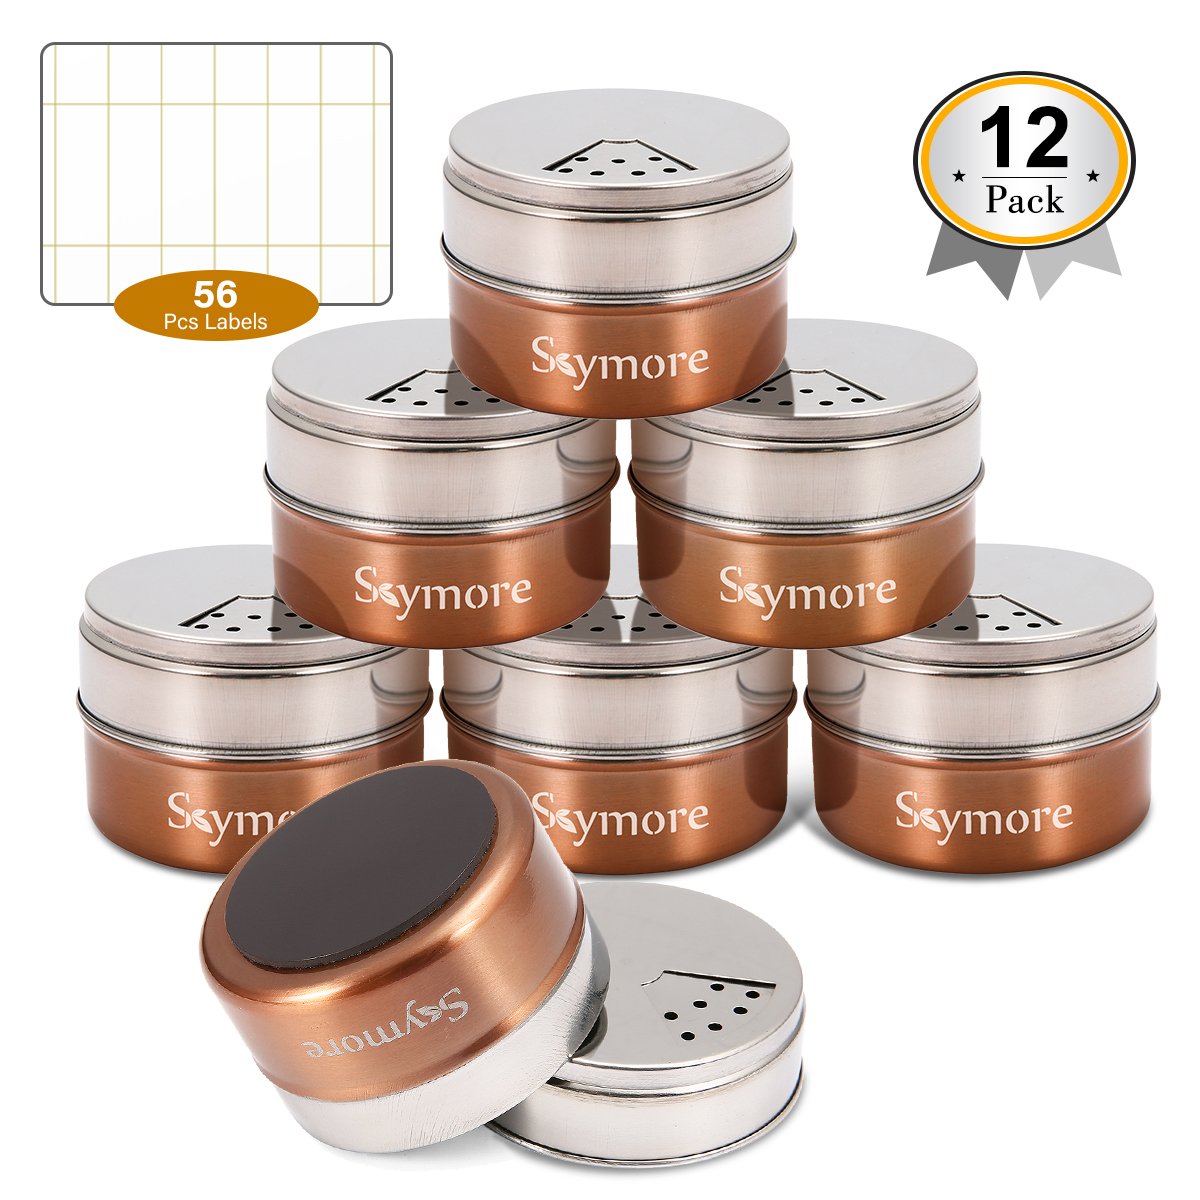 Skymore 12 Pcs Magnetic Spice Tins, Stainless Steel Jar, kitchen spice storage containers, Round Storage Containers with Top Lid with Sift or Pour,Stickers, Great for For Salt, Pepper or Seasoning